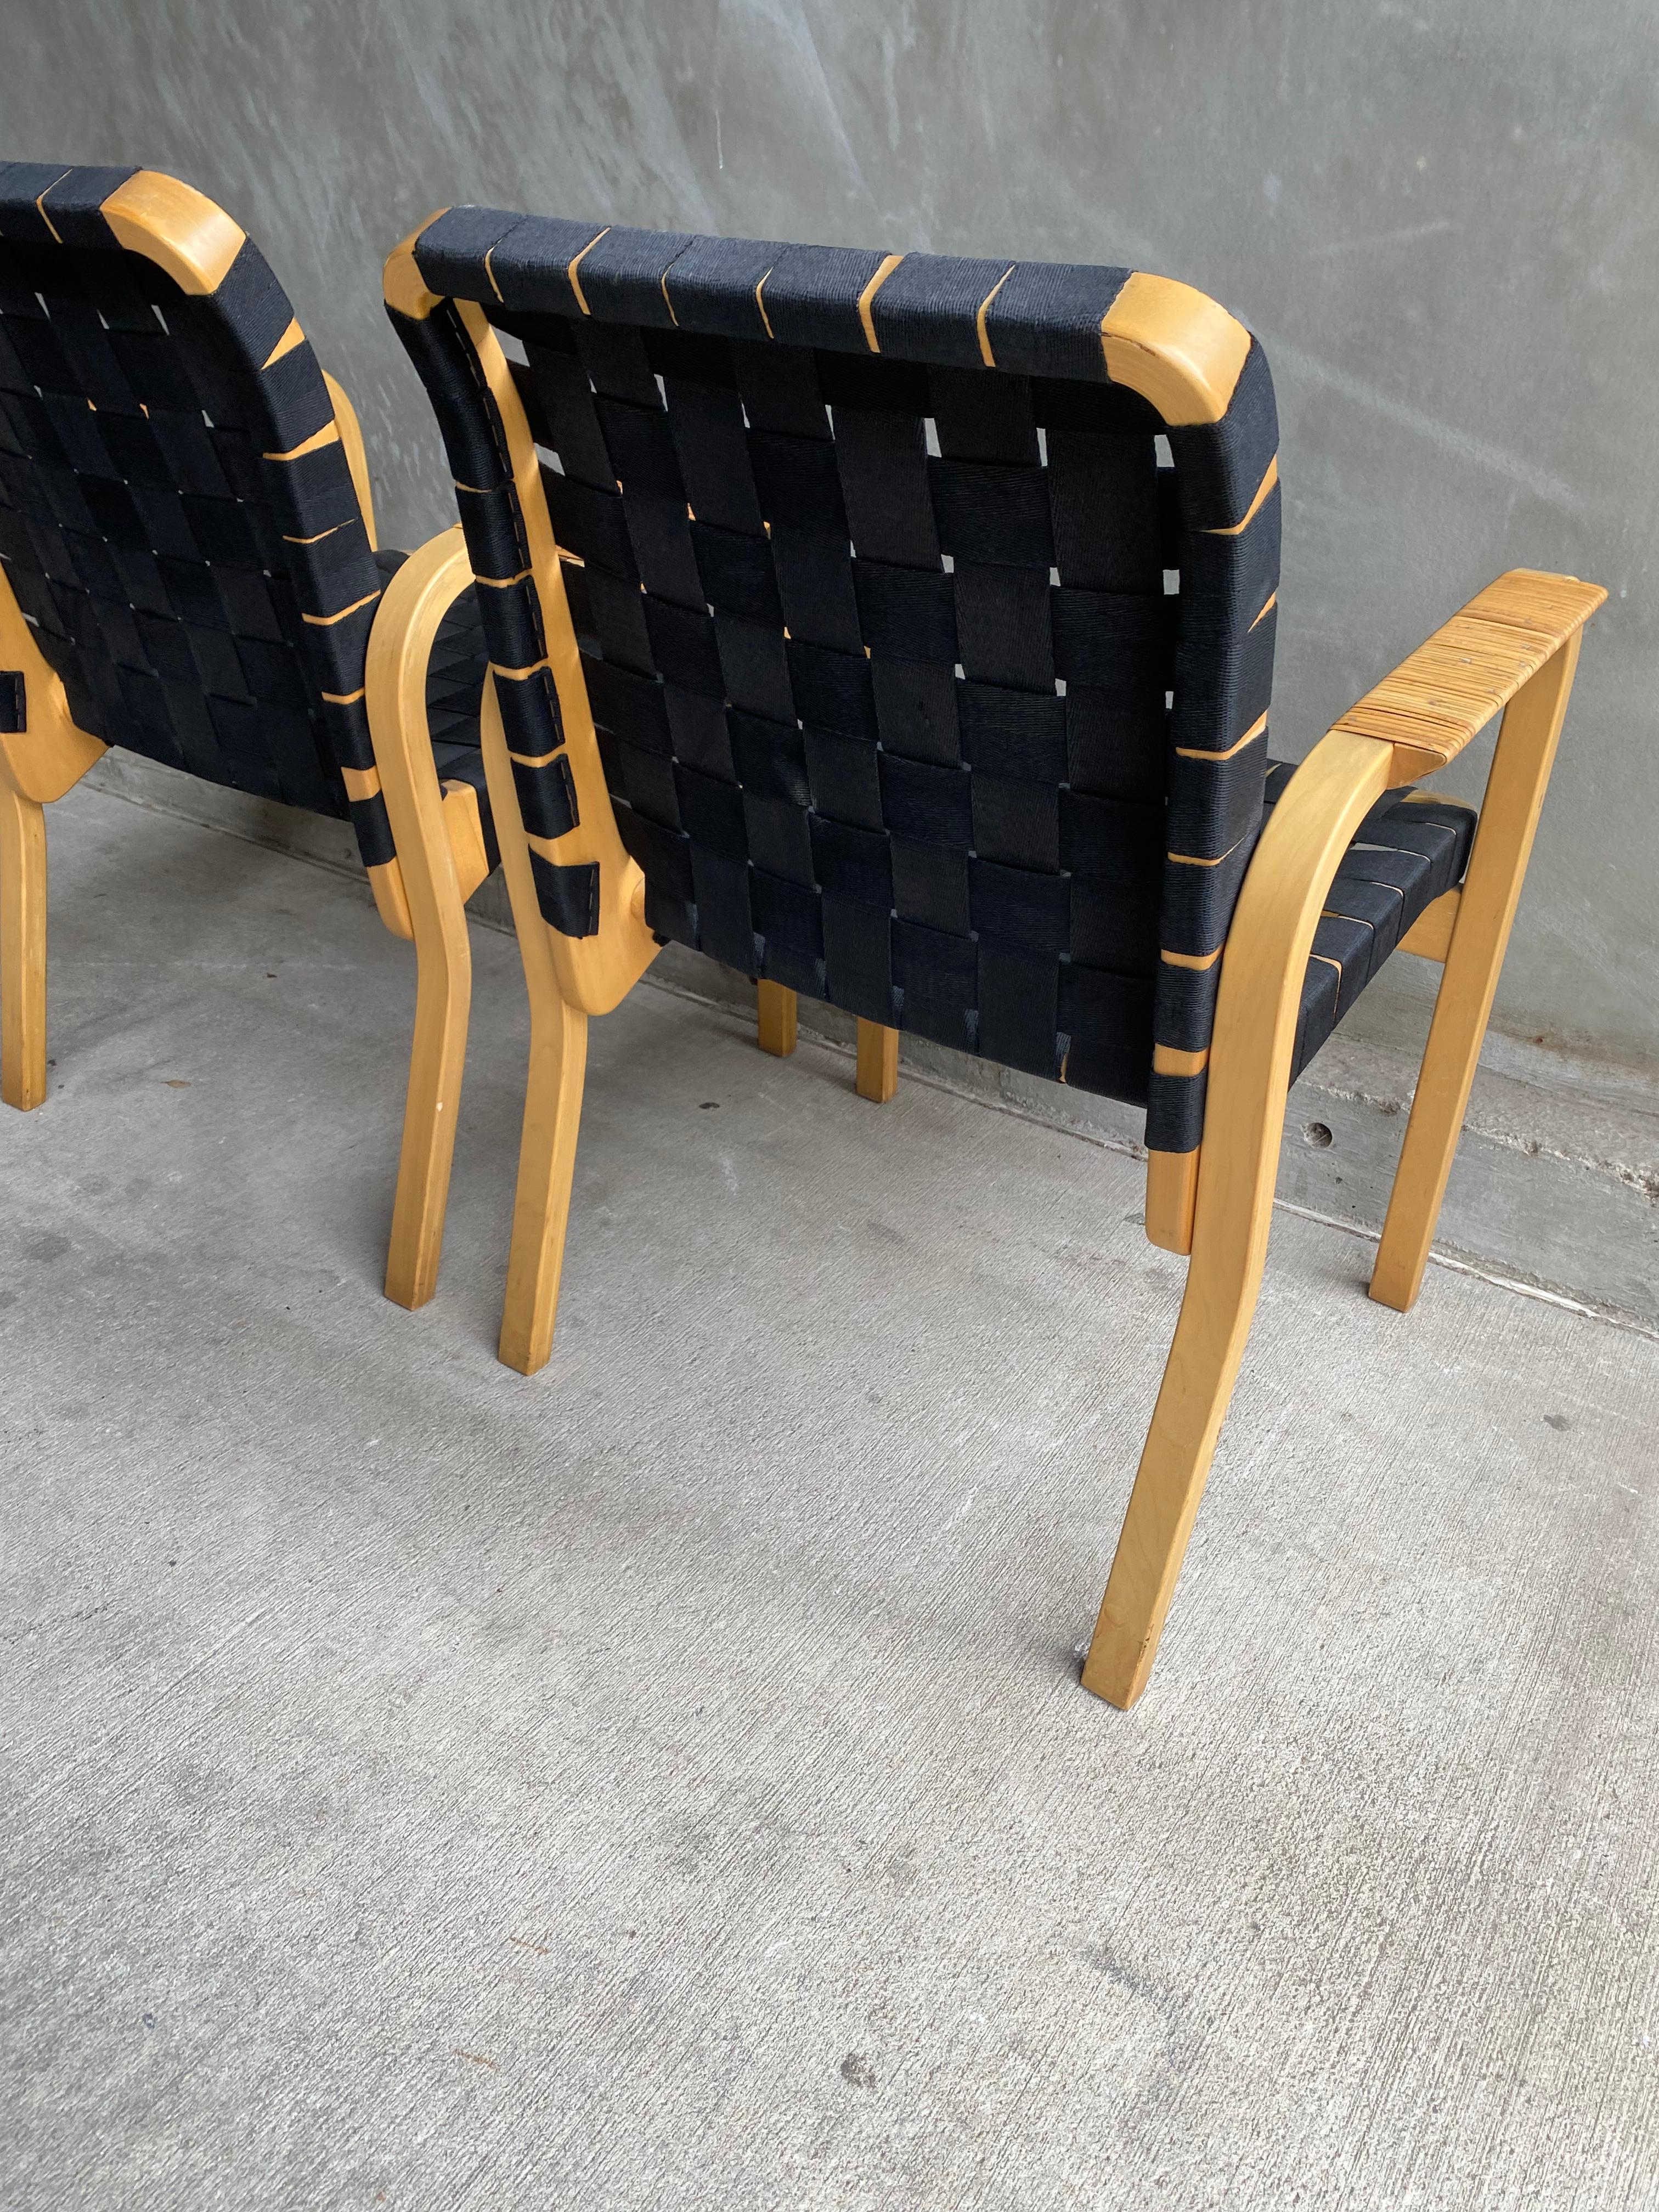 Set of 4 Alvar Aalto Chairs with Black Straps, Finland, 1960's For Sale 3